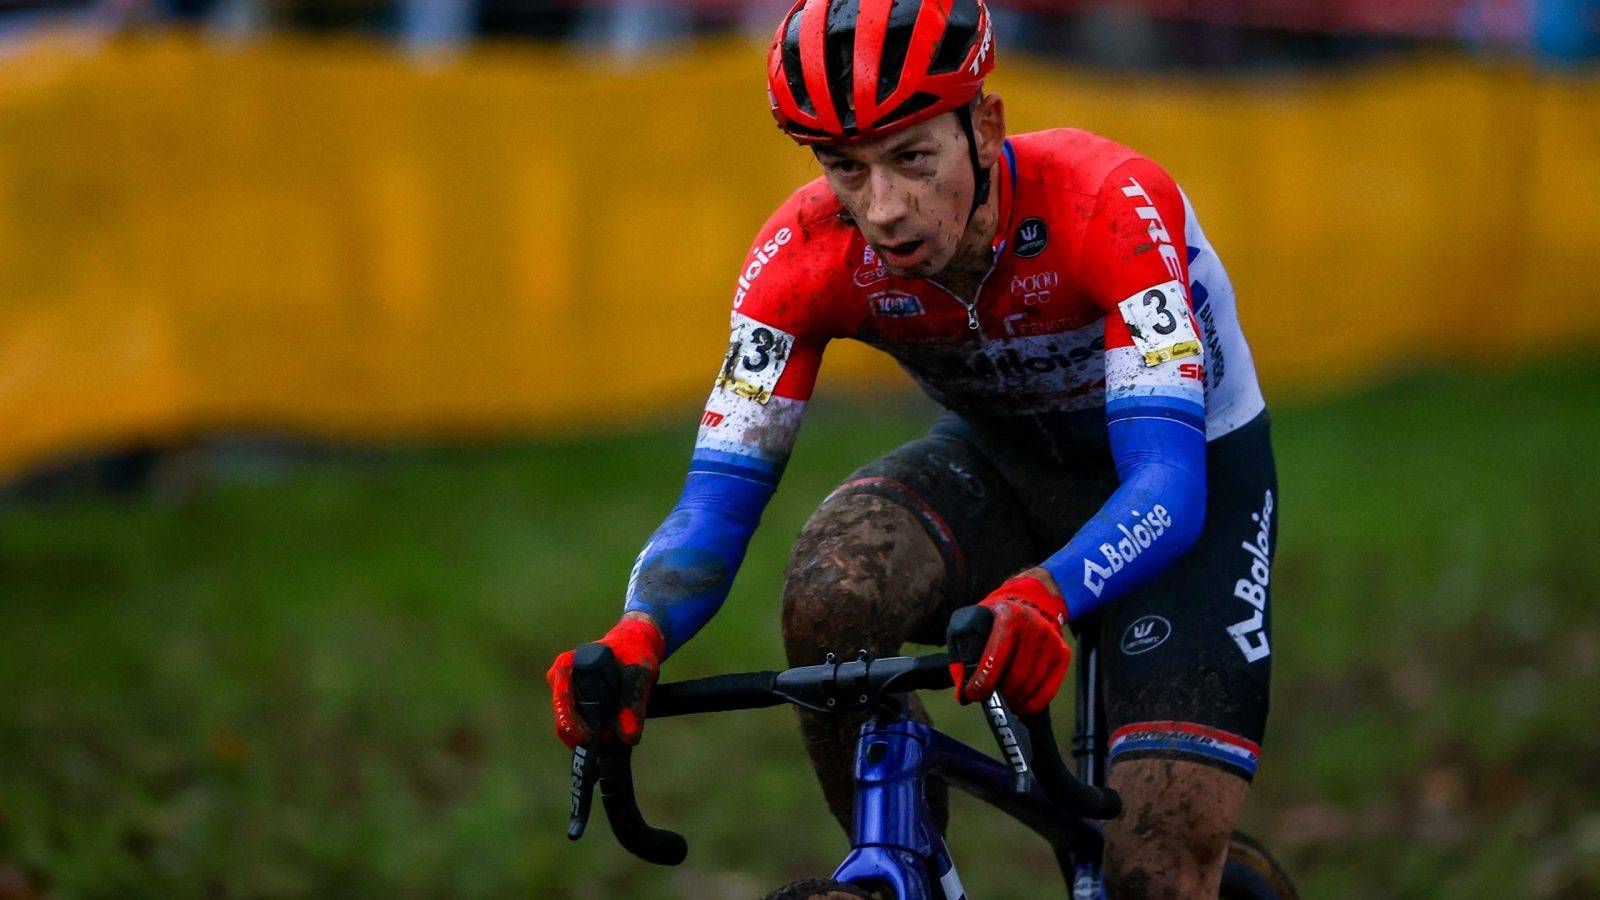 Dutch Lars Van Der Haar pictured in action during the men elite race of the Superprestige Gullegem, 7th stage (out of 8) in the Superprestige cyclocross cycling competition, in Gullegem, Saturday 07 January 2023. BELGA PHOTO DAVID PINTENS